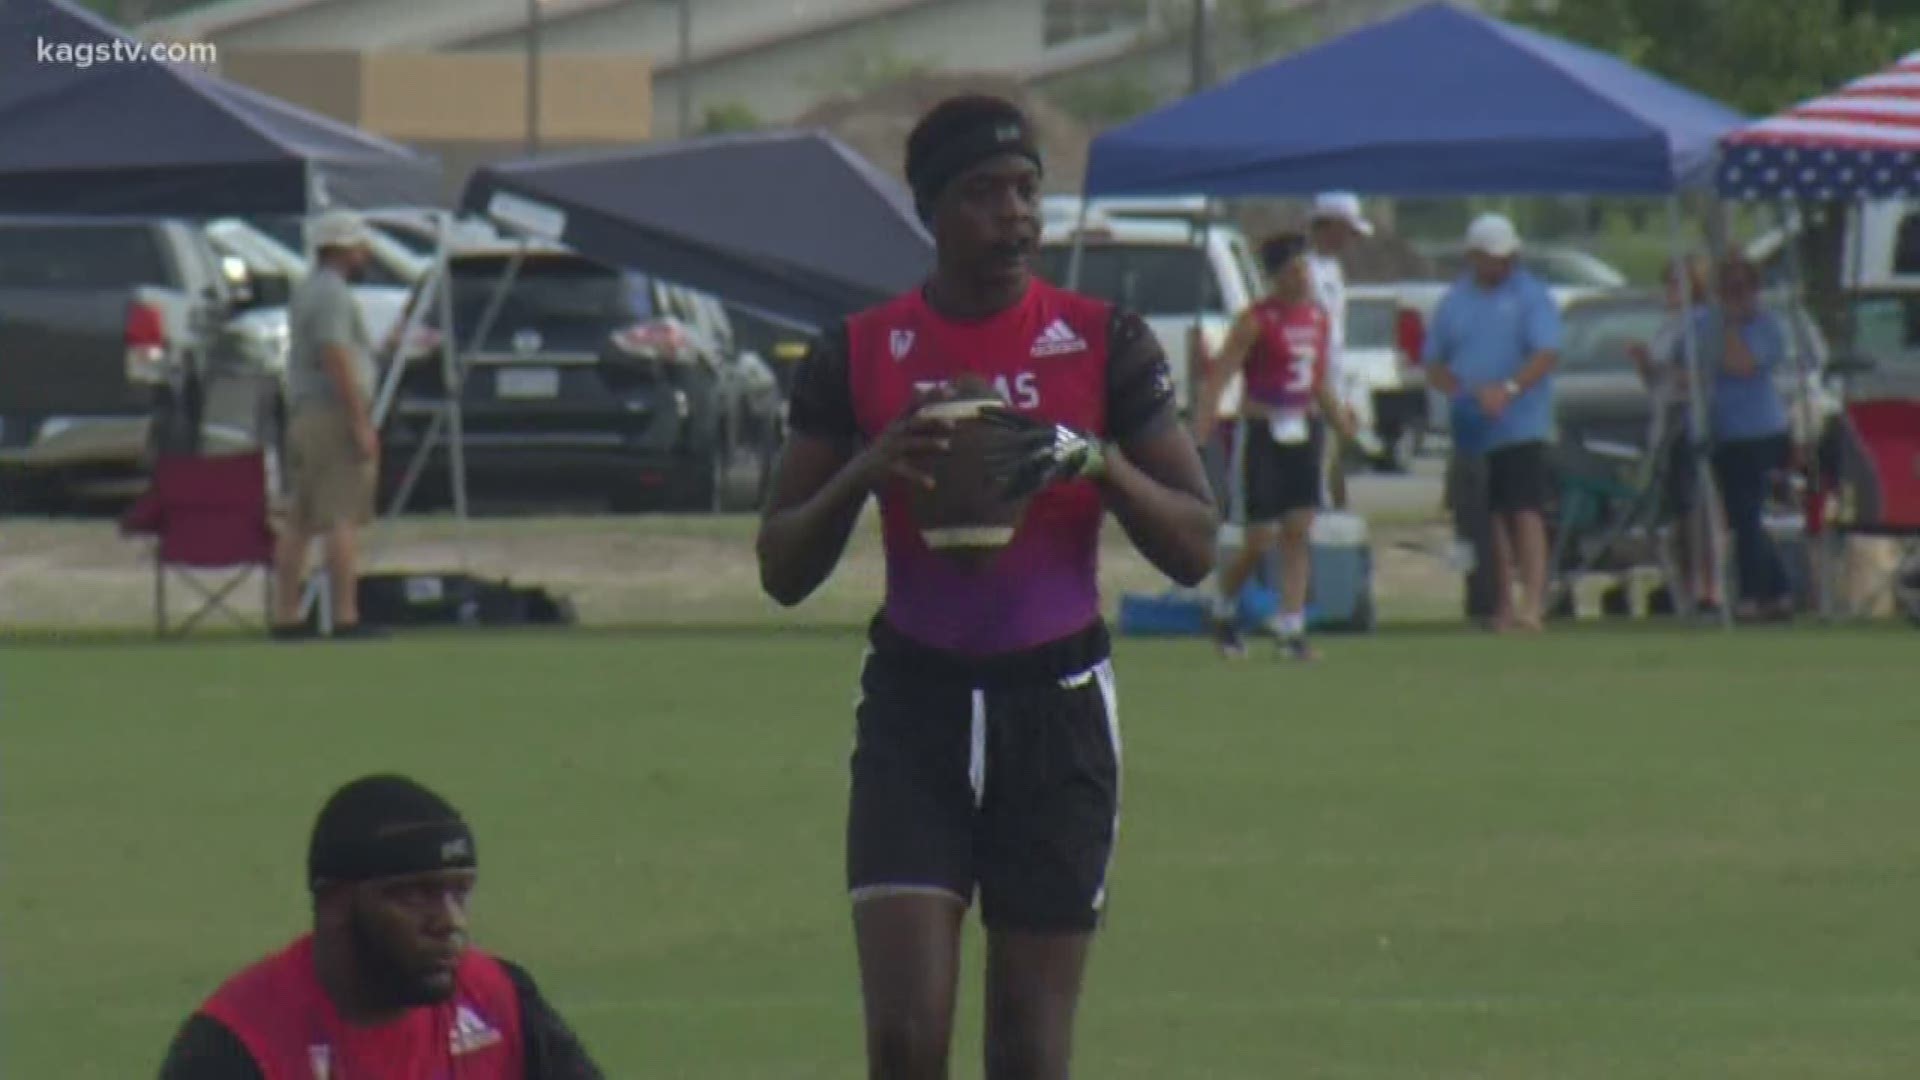 Defending champion College Station and runner-up A&M Consolidated are both in the field for the annual 7on7 State Tournament. Both teams say playing in the event helps with team chemistry once the actual season begins.